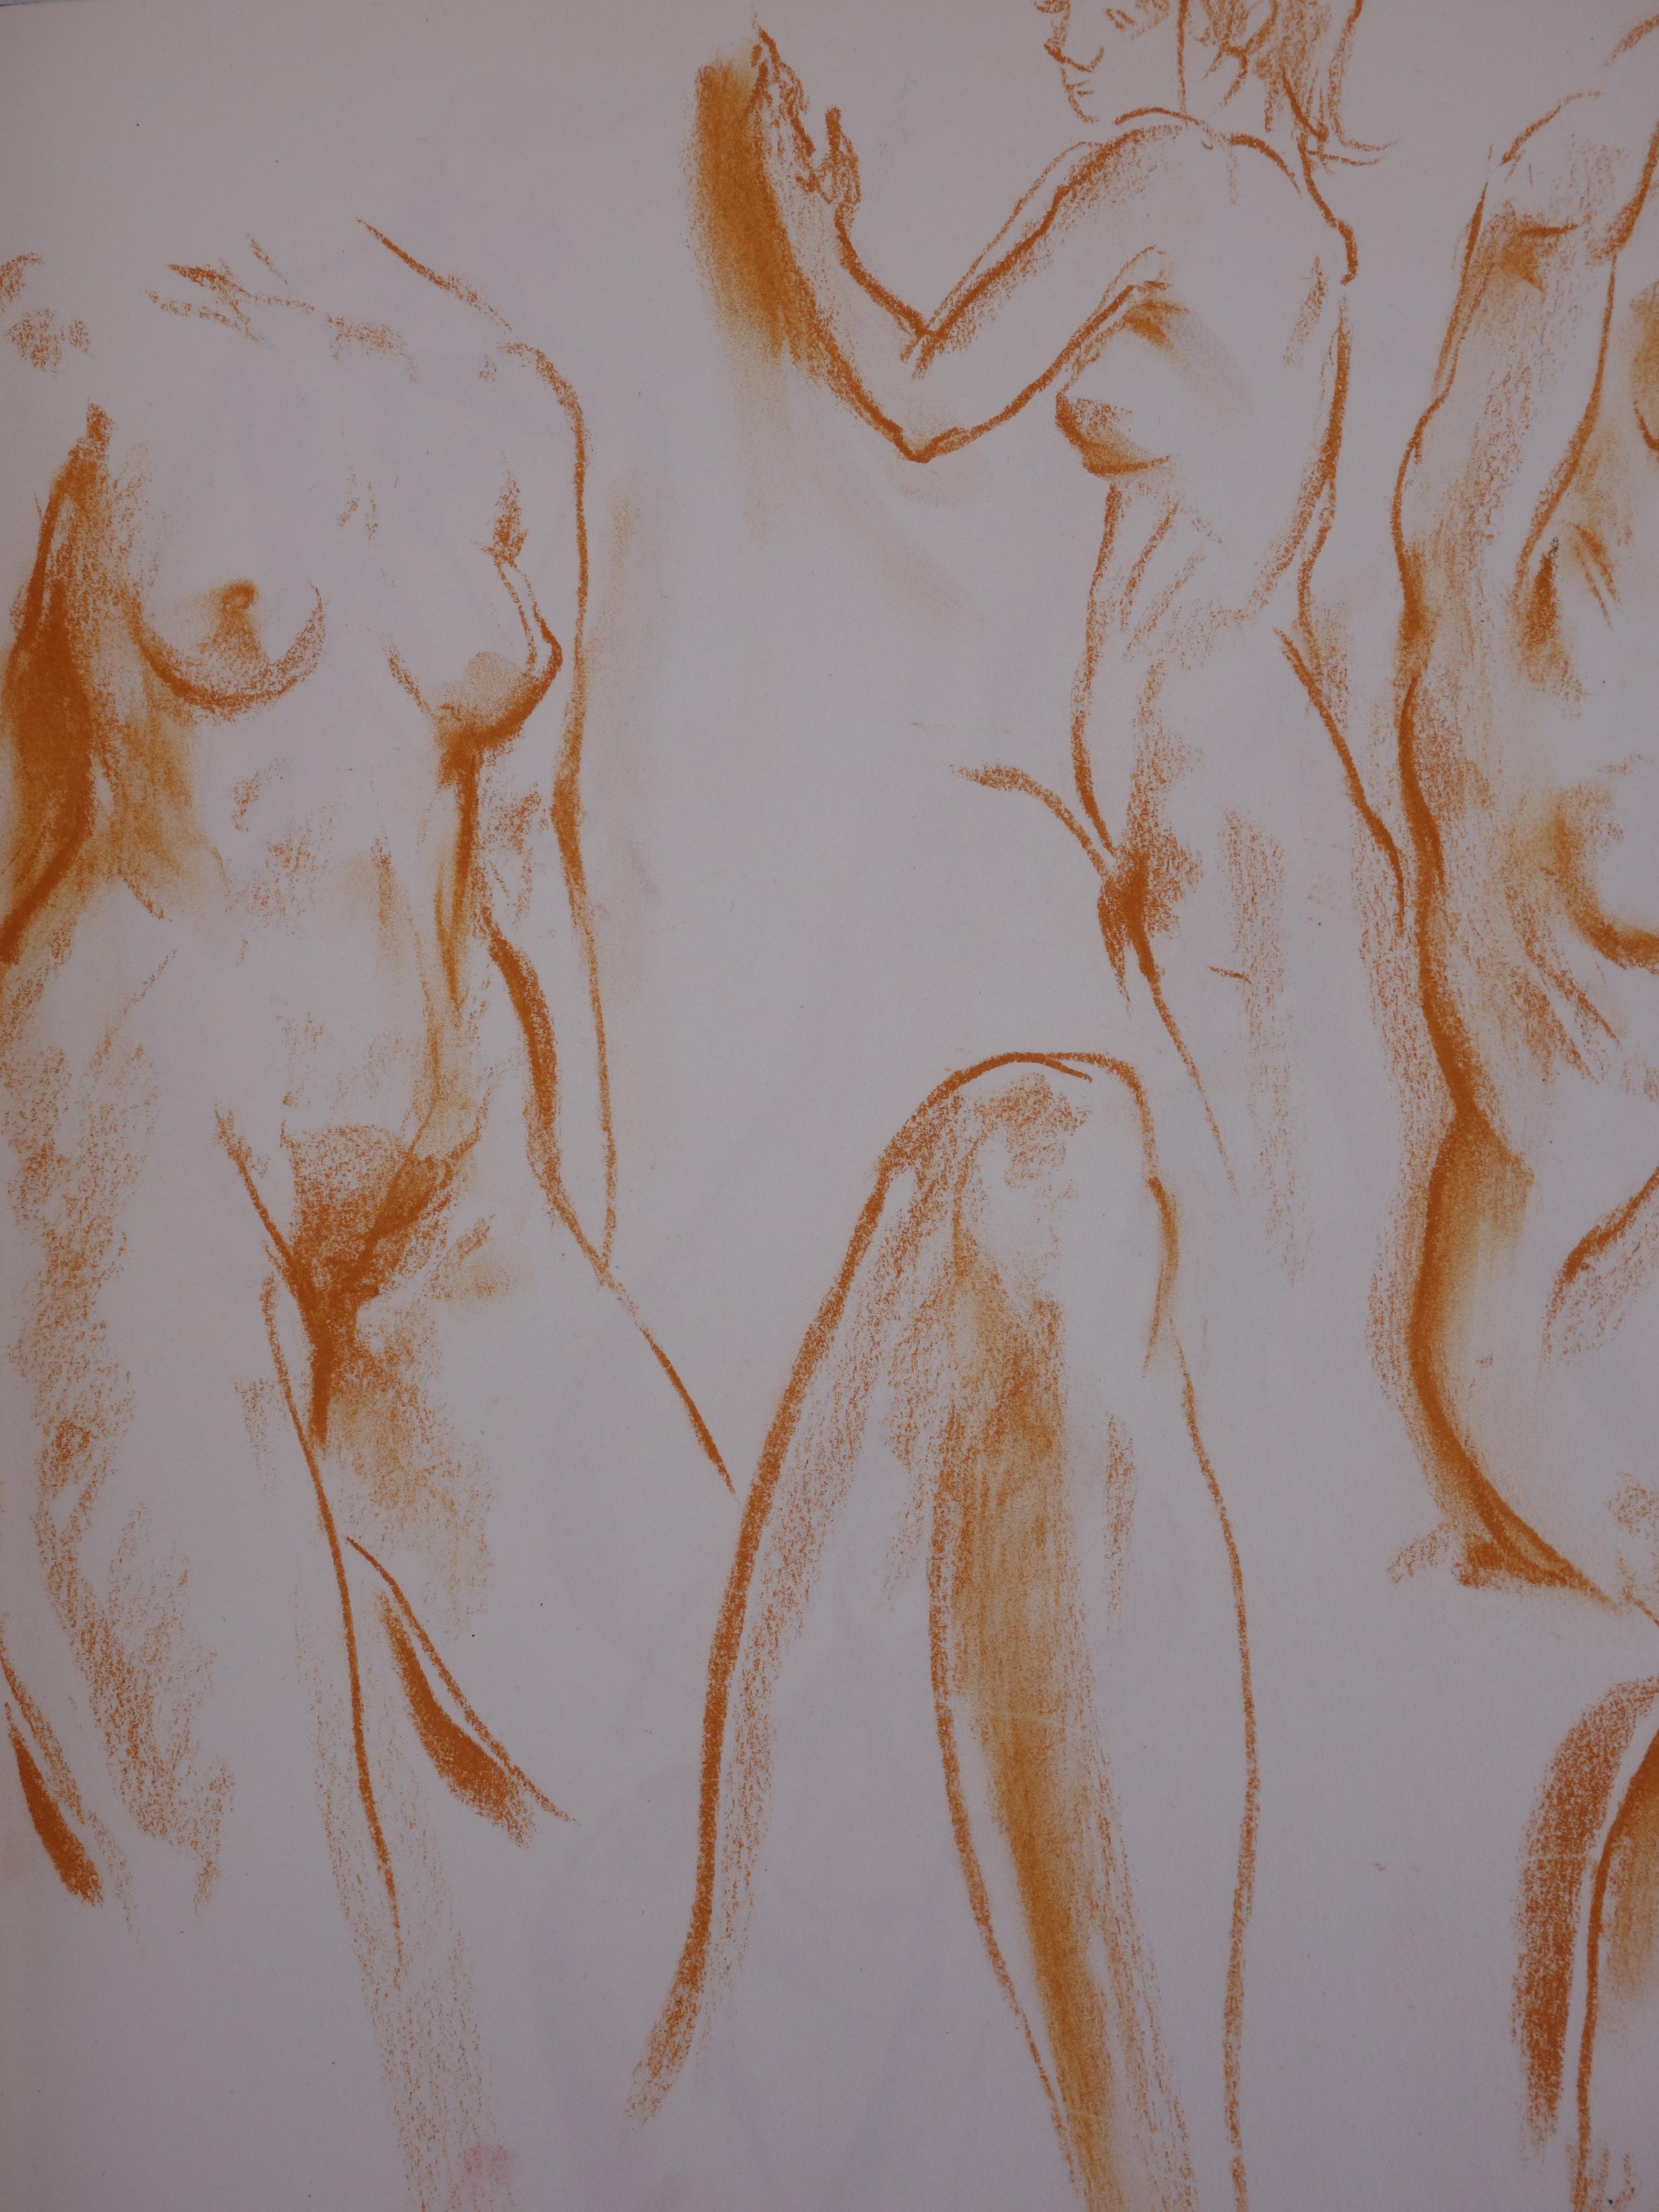 Studies of a Model in the Workshop - Original charcoals drawing - Modern Art by Gaston Coppens